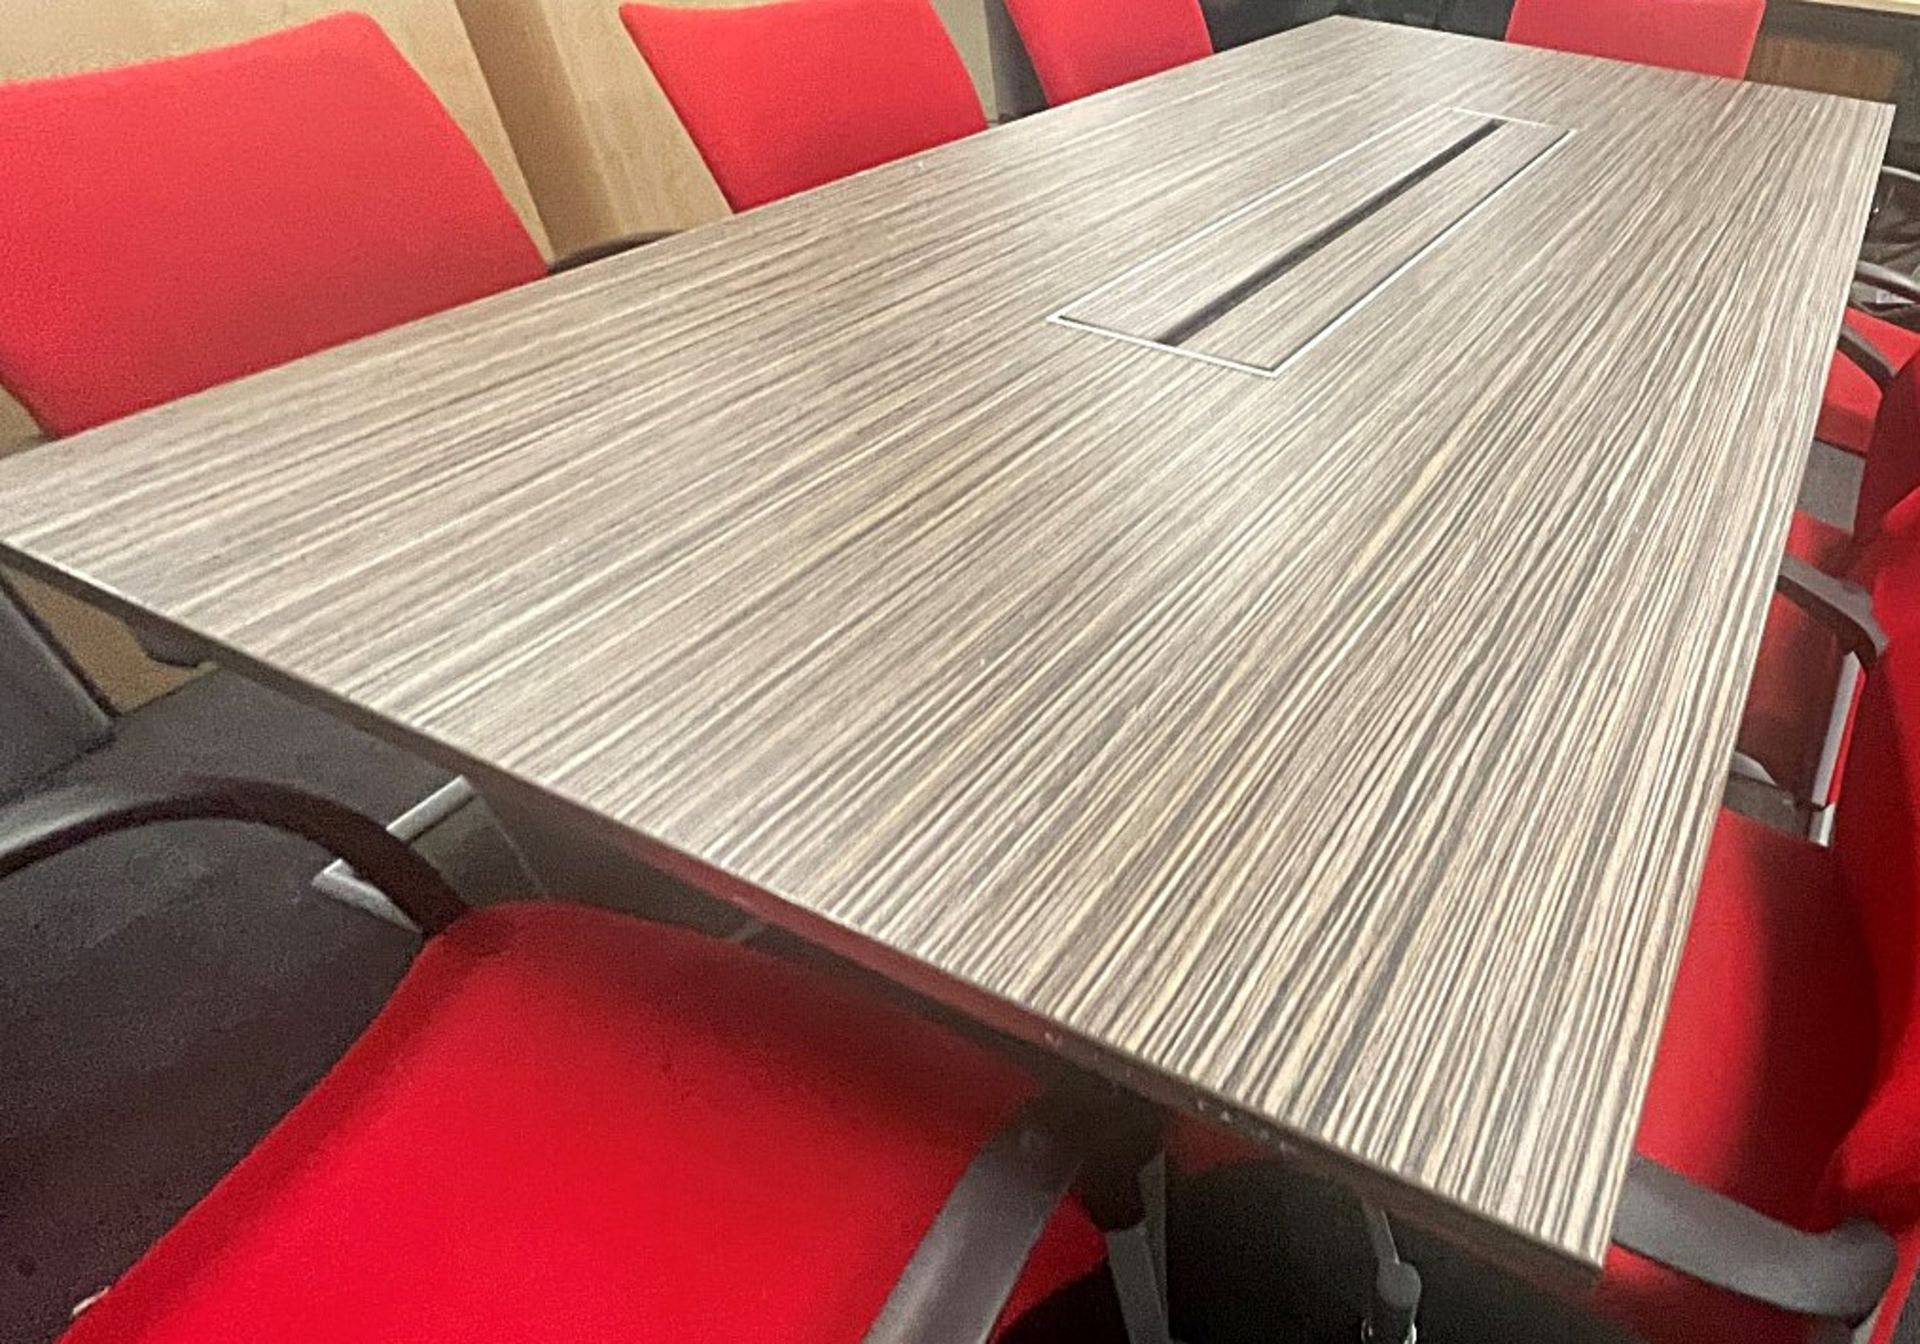 1 x 2-Metre Long Boardroom Table With 8 x Red Senator Chairs - To Be Removed From An Executive - Image 4 of 18